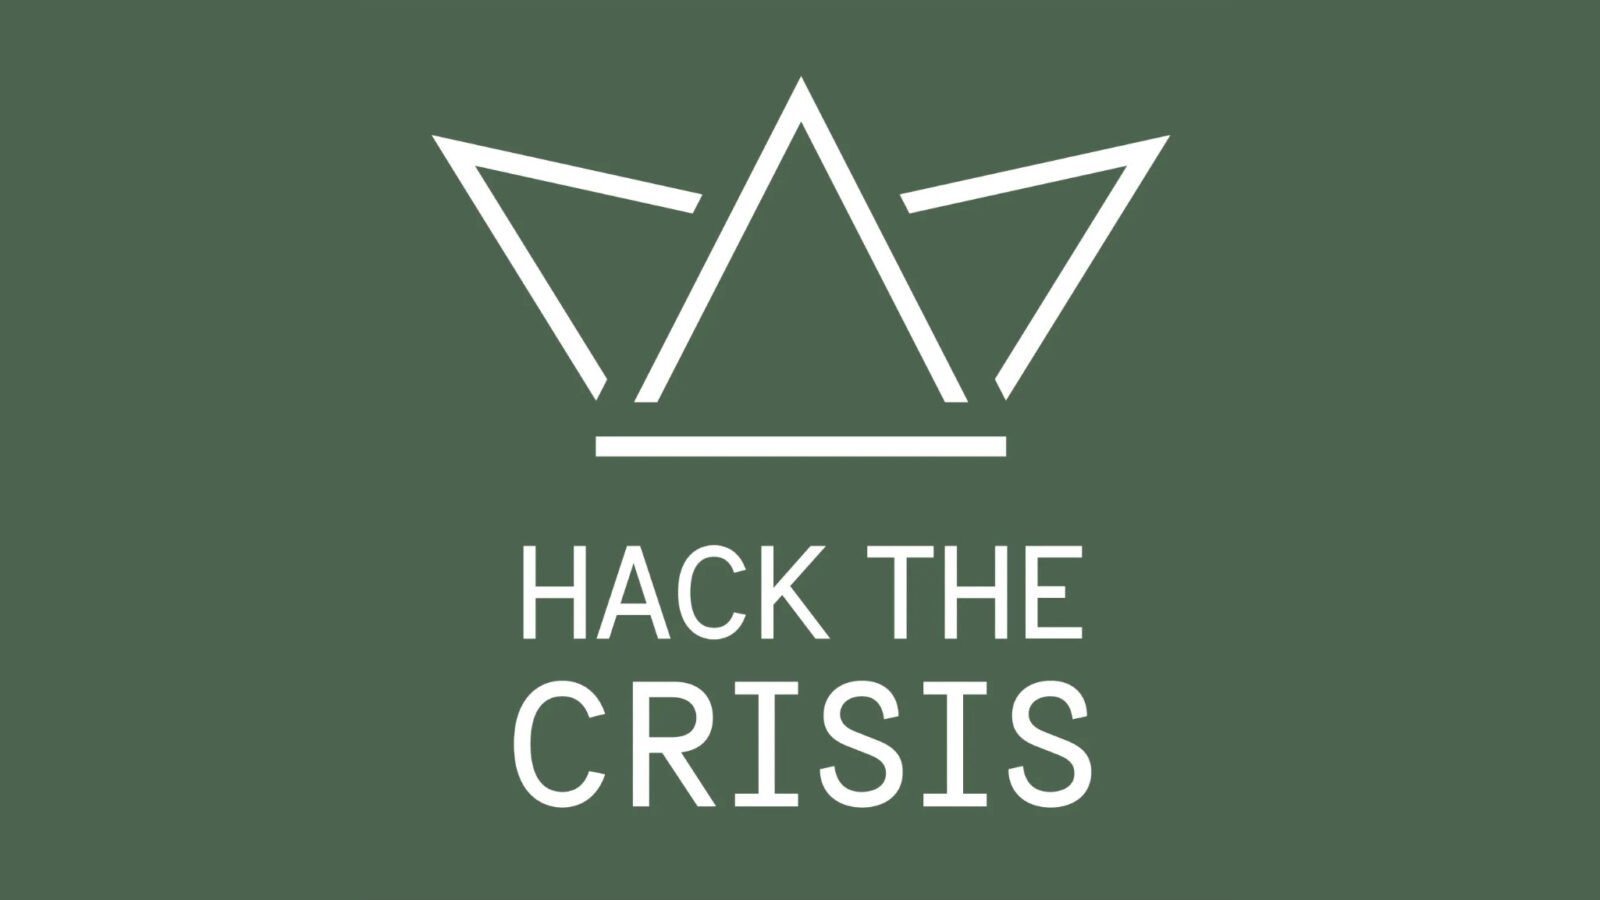 Hack the crisis green